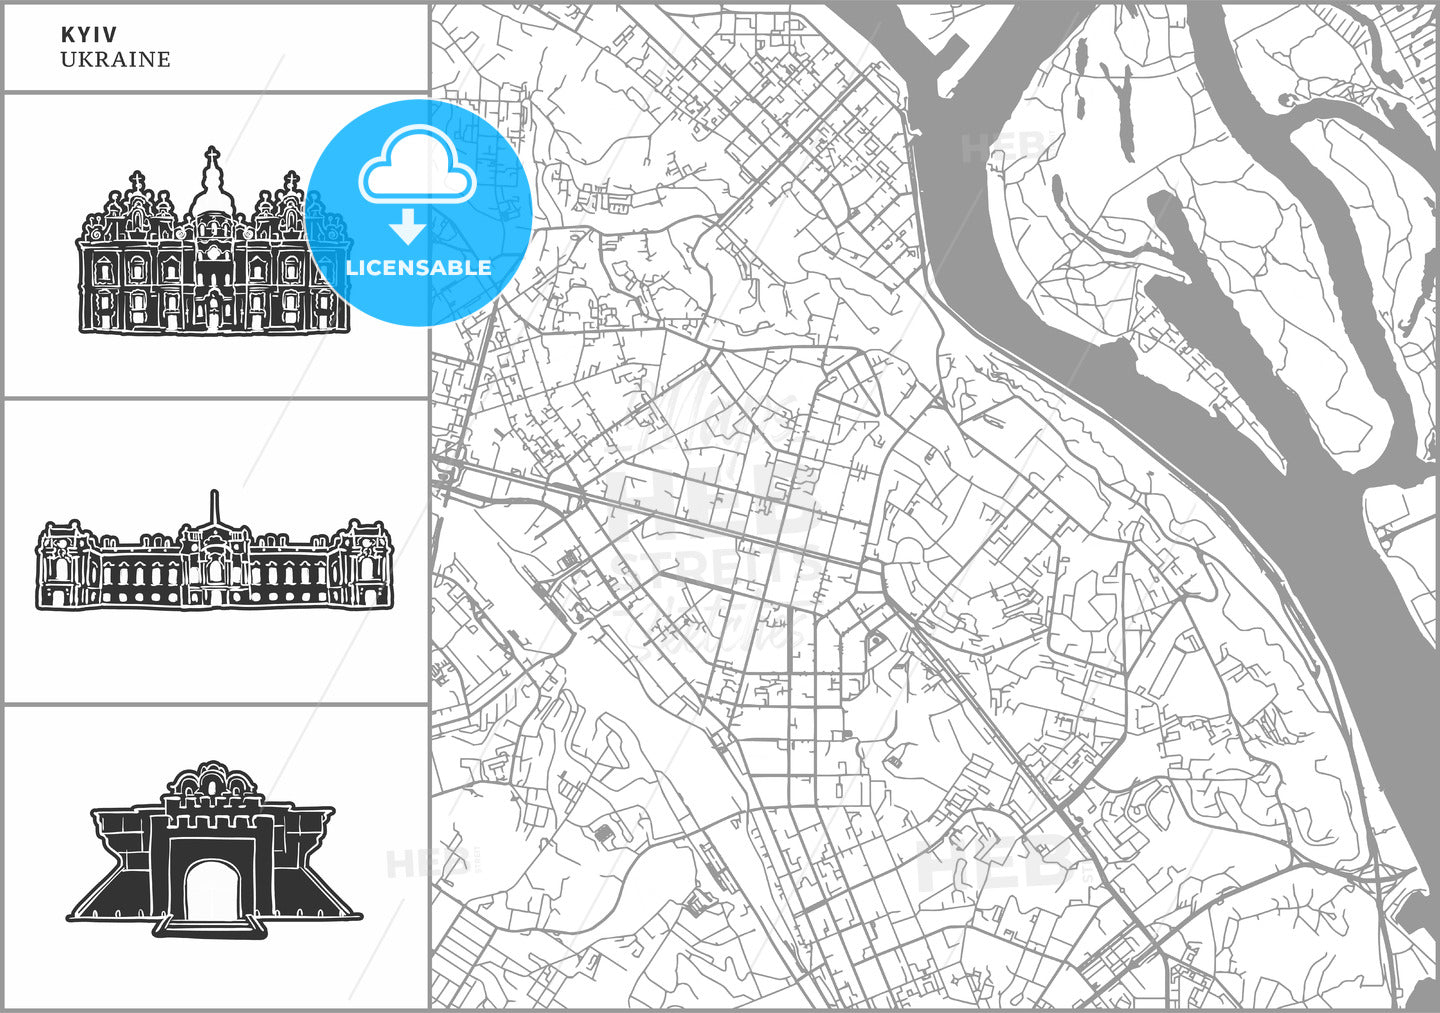 Kyiv city map with hand-drawn architecture icons